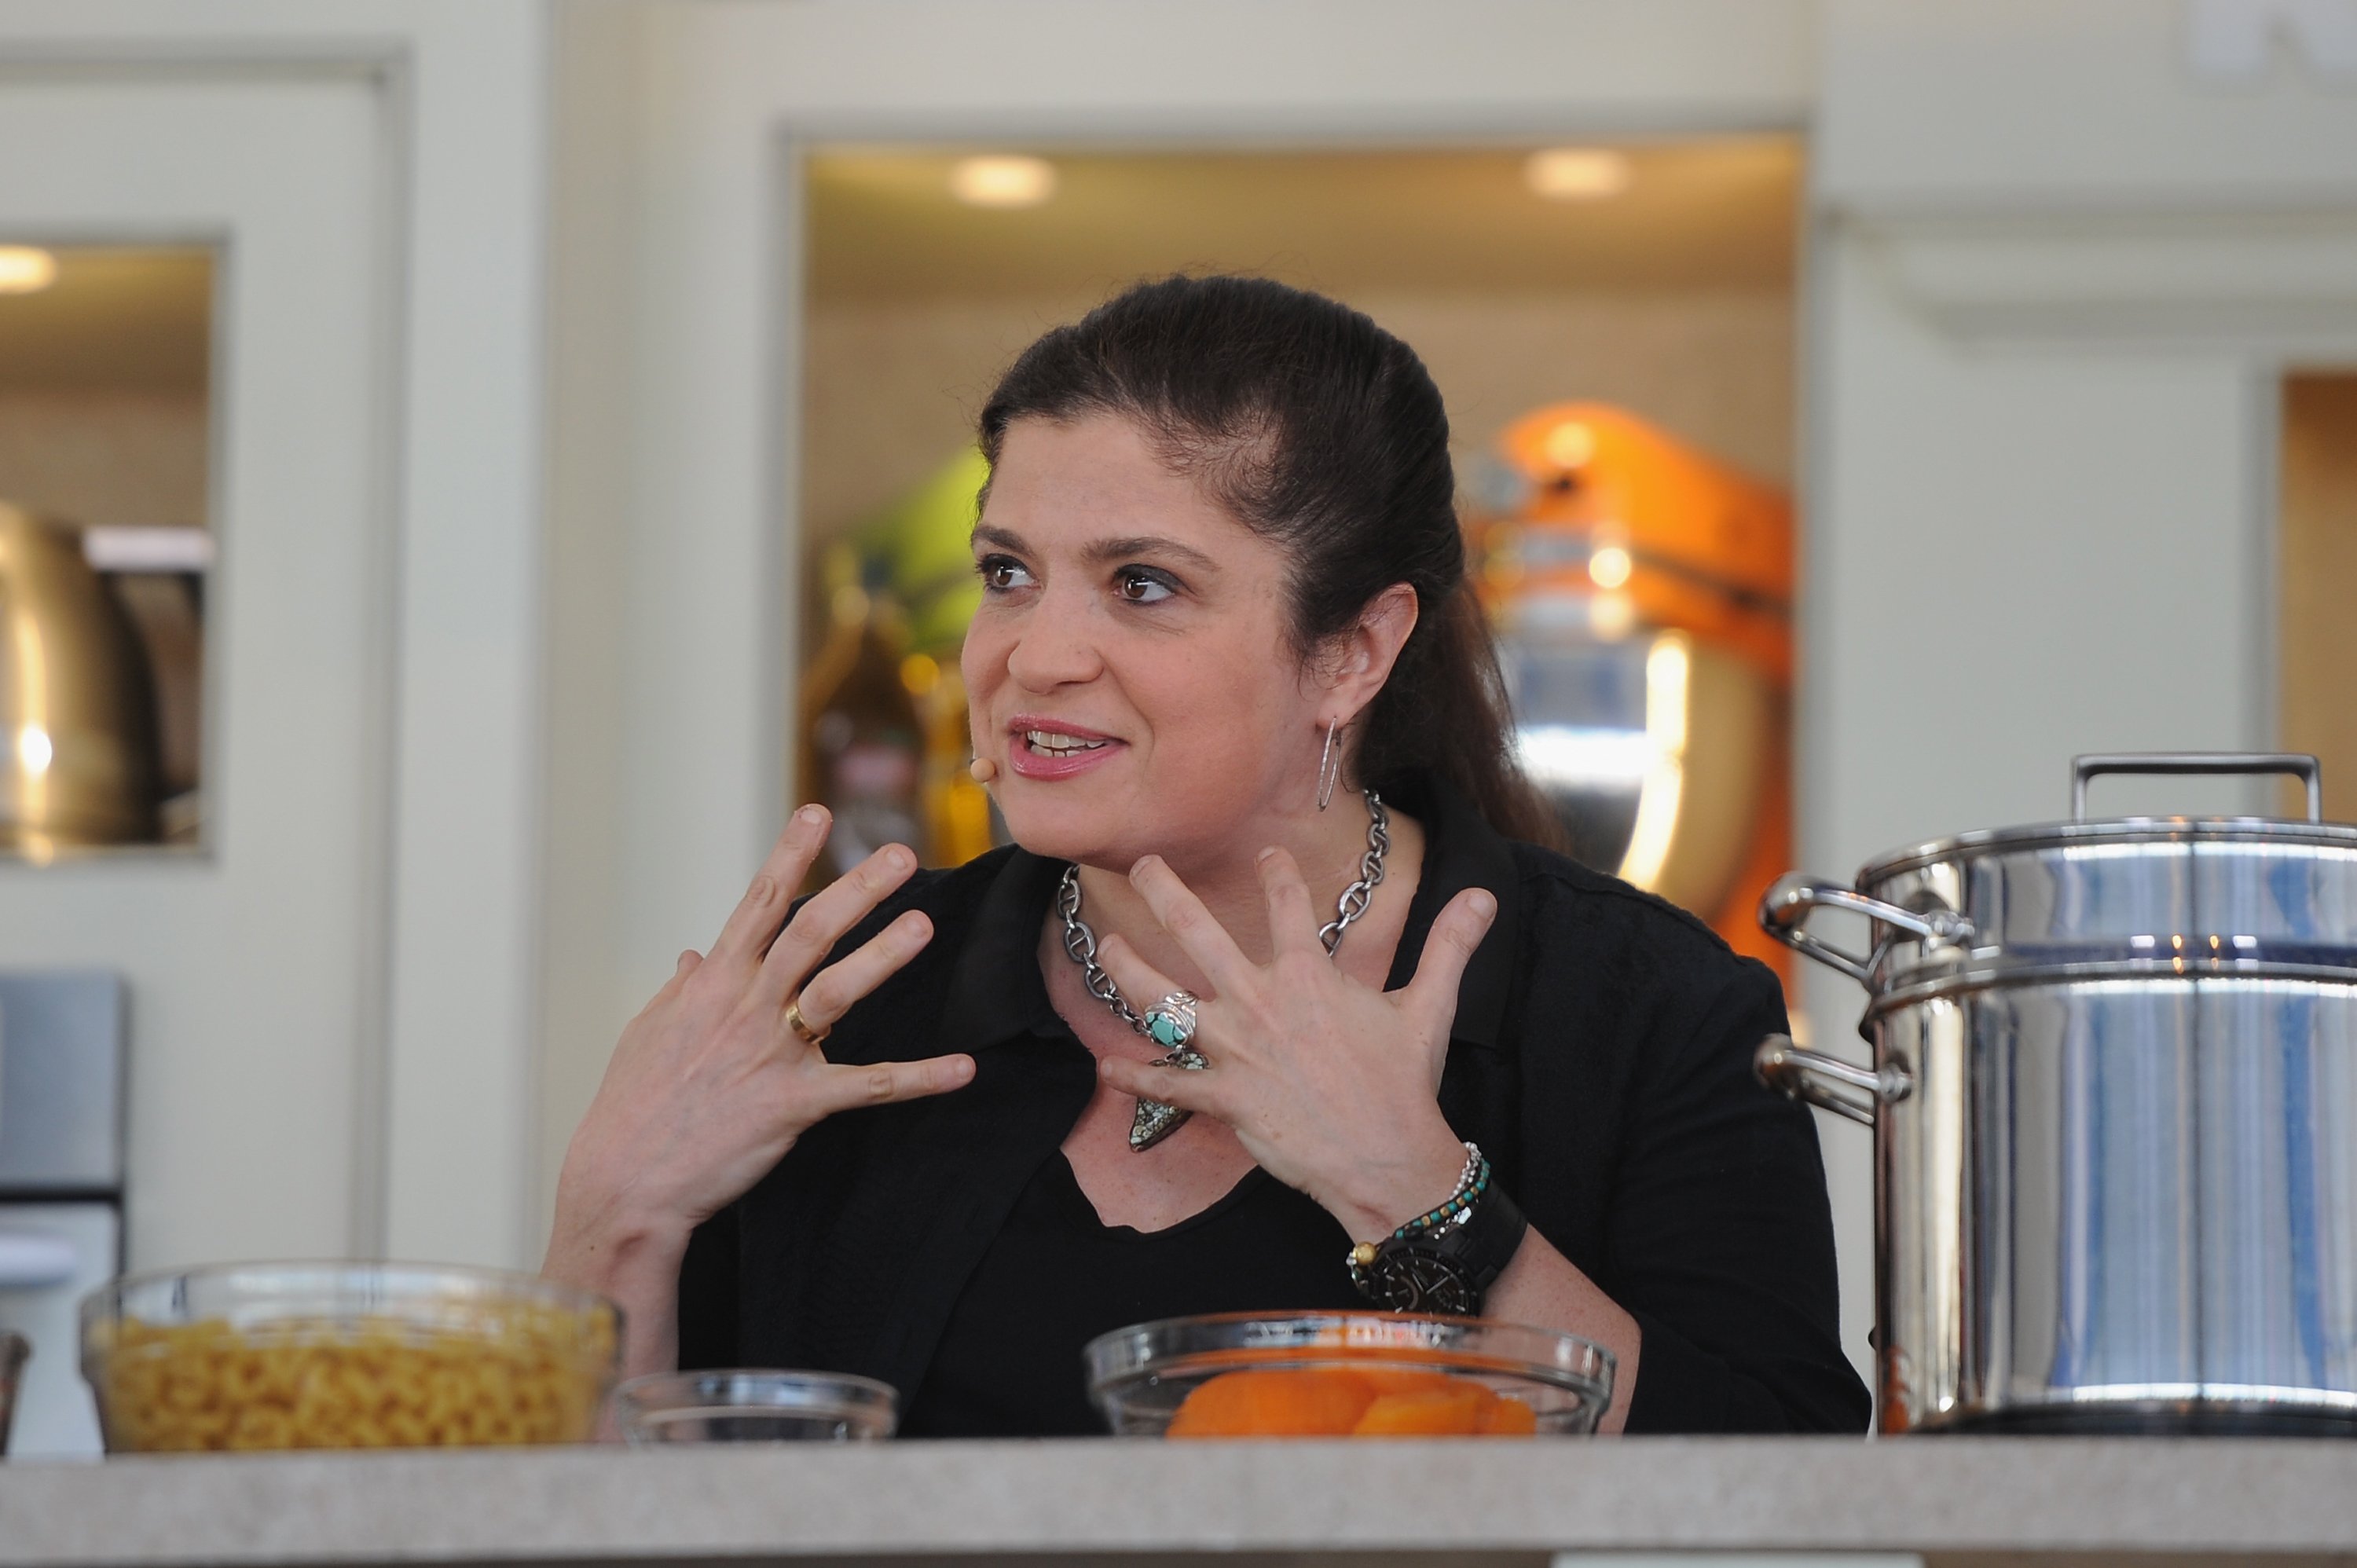 Alex Guarnaschelli at the Whole Foods Market Grand Tasting Village during the 2015 Food Network & Cooking Channel South Beach Wine & Food Festival at Grand Tasting Village on February 22, 2015 in Miami Beach, Florida. / Source: Getty Images